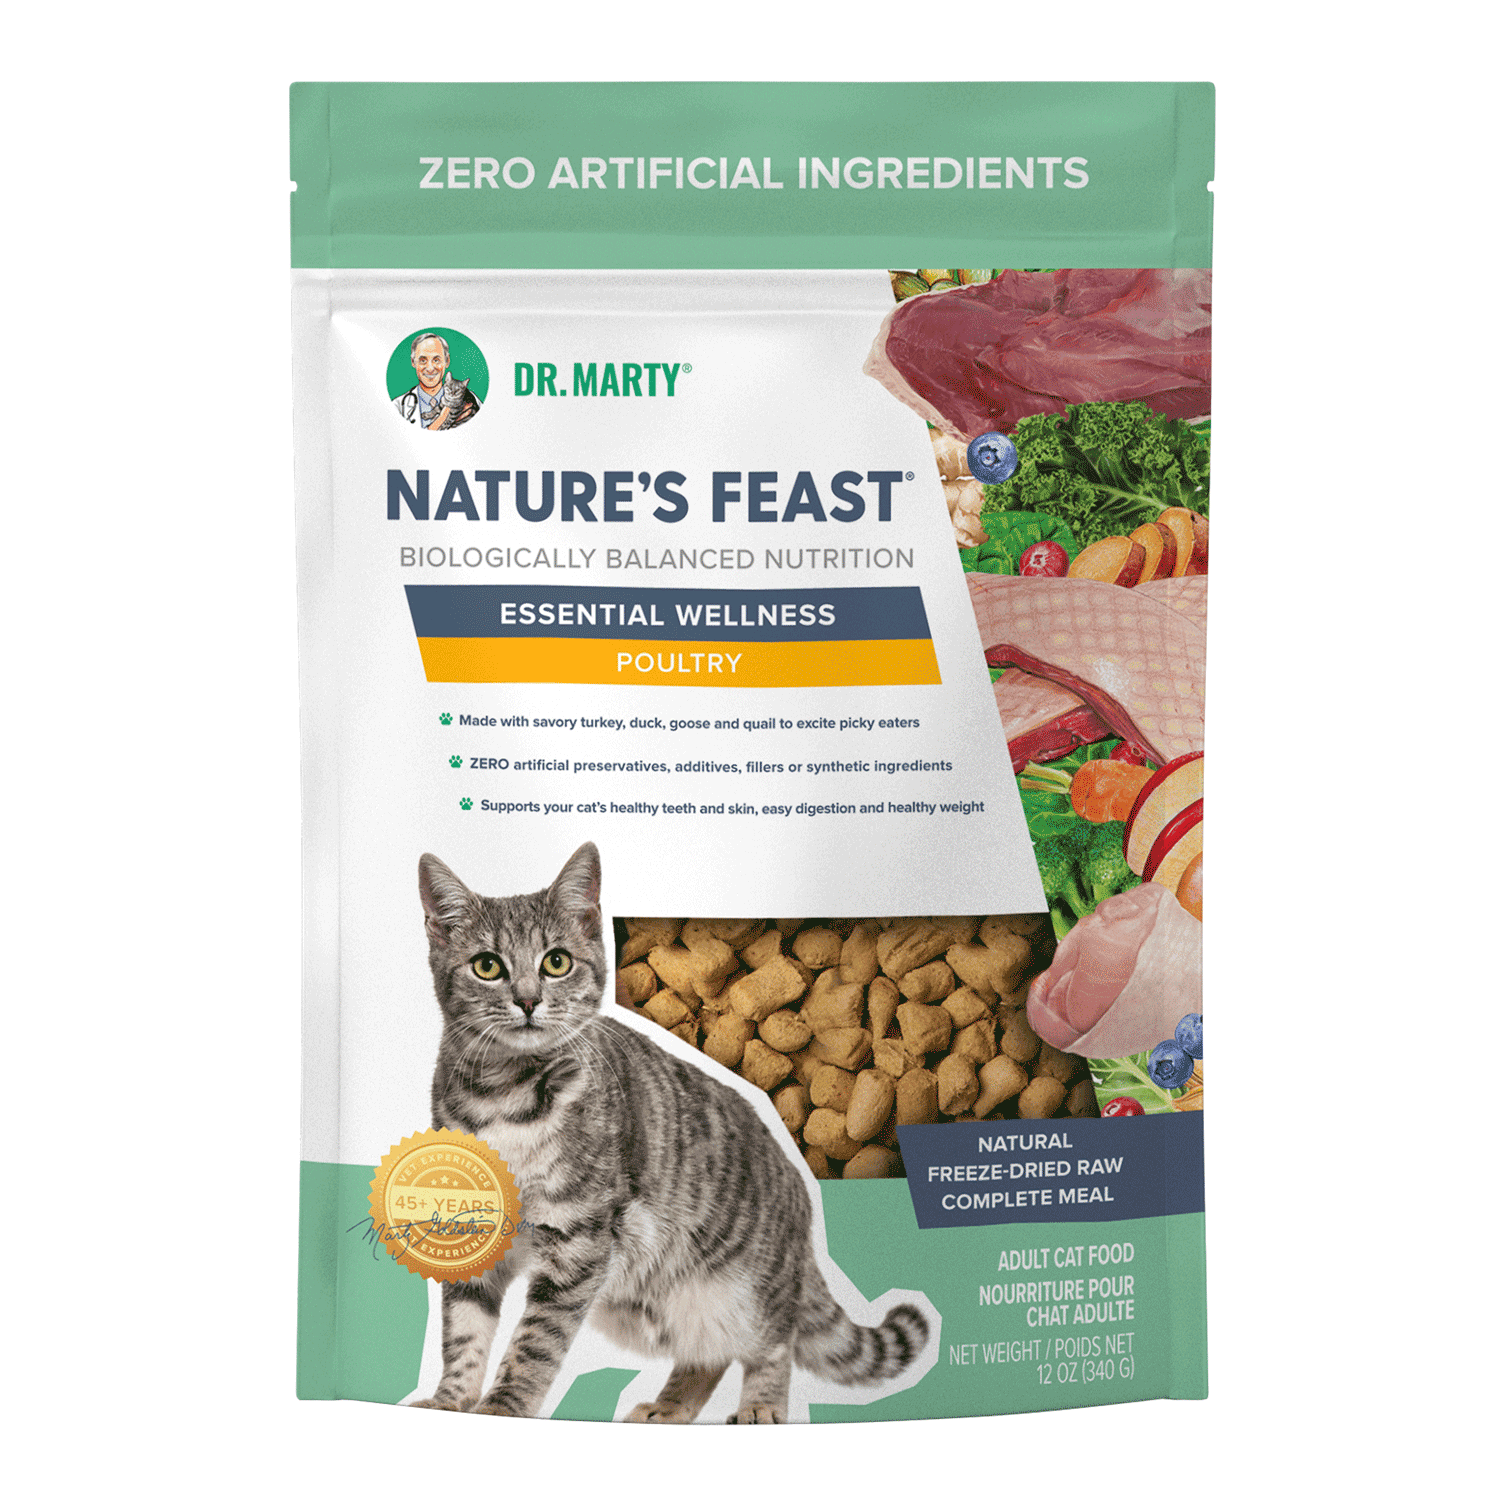 Dr Marty Nature’s Feast – Essential Wellness – Poultry